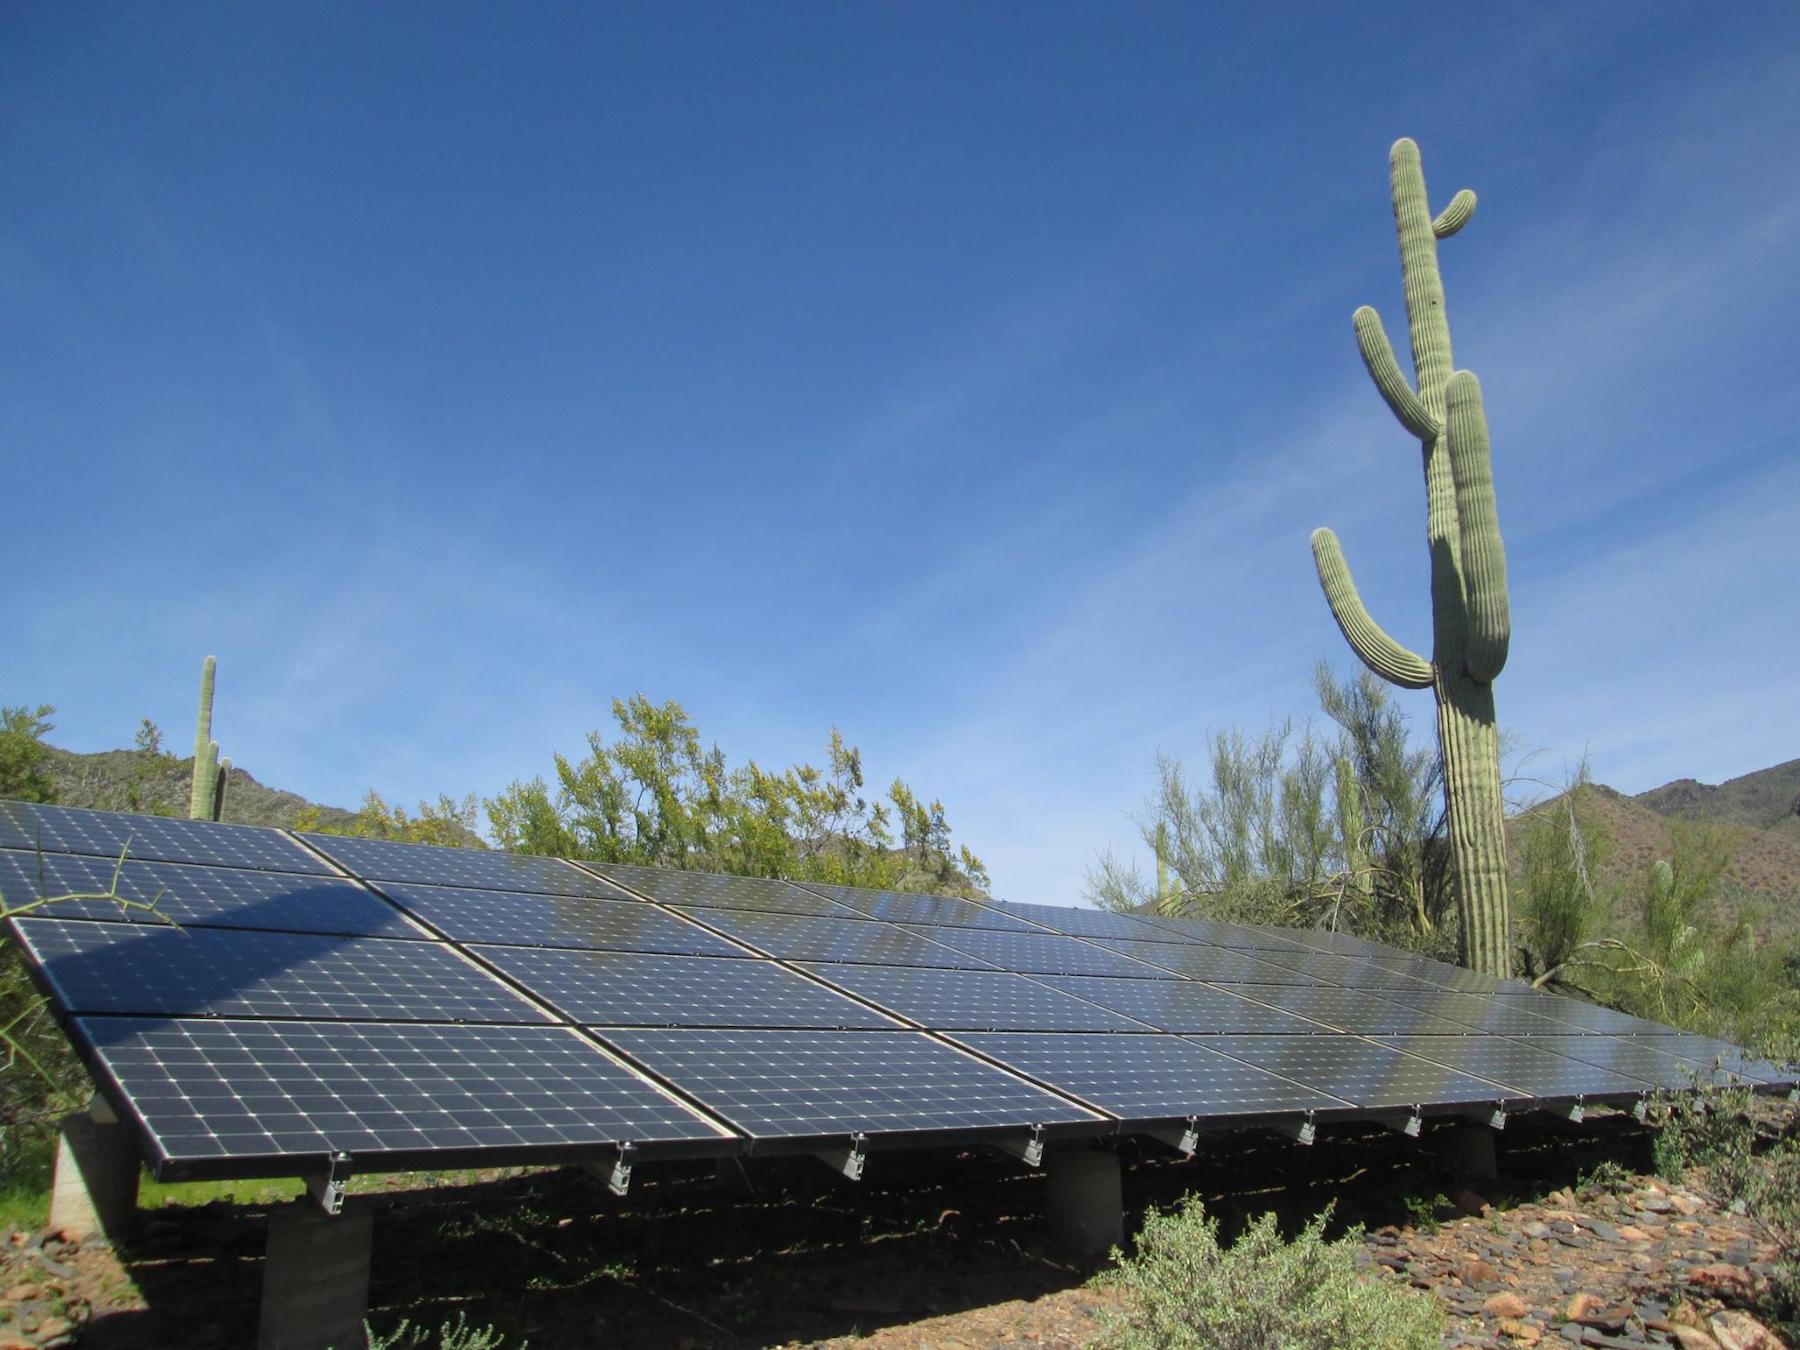 Ground mounted solar panels in Arizona with cactus in the background